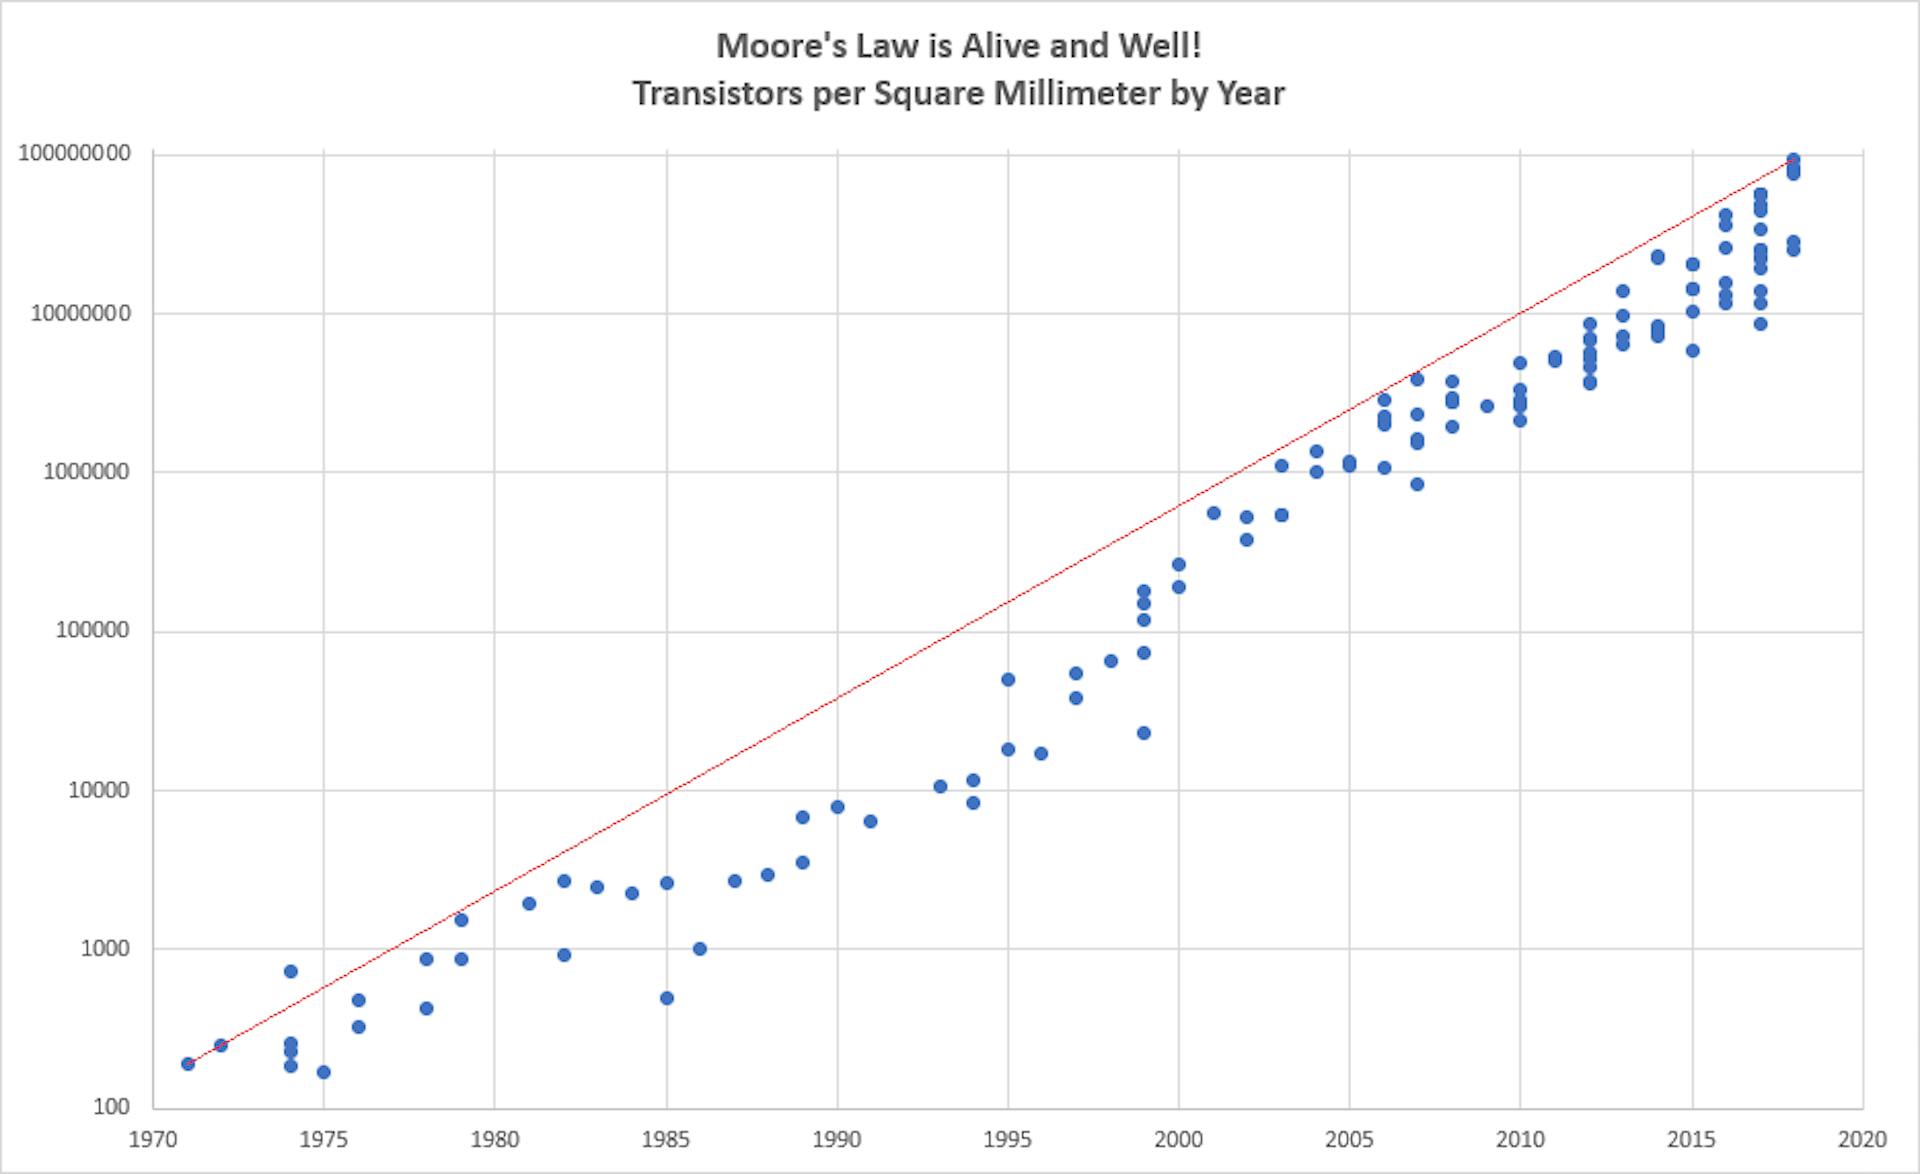 Moore's Law In Action (1970-2020). Source: Medium